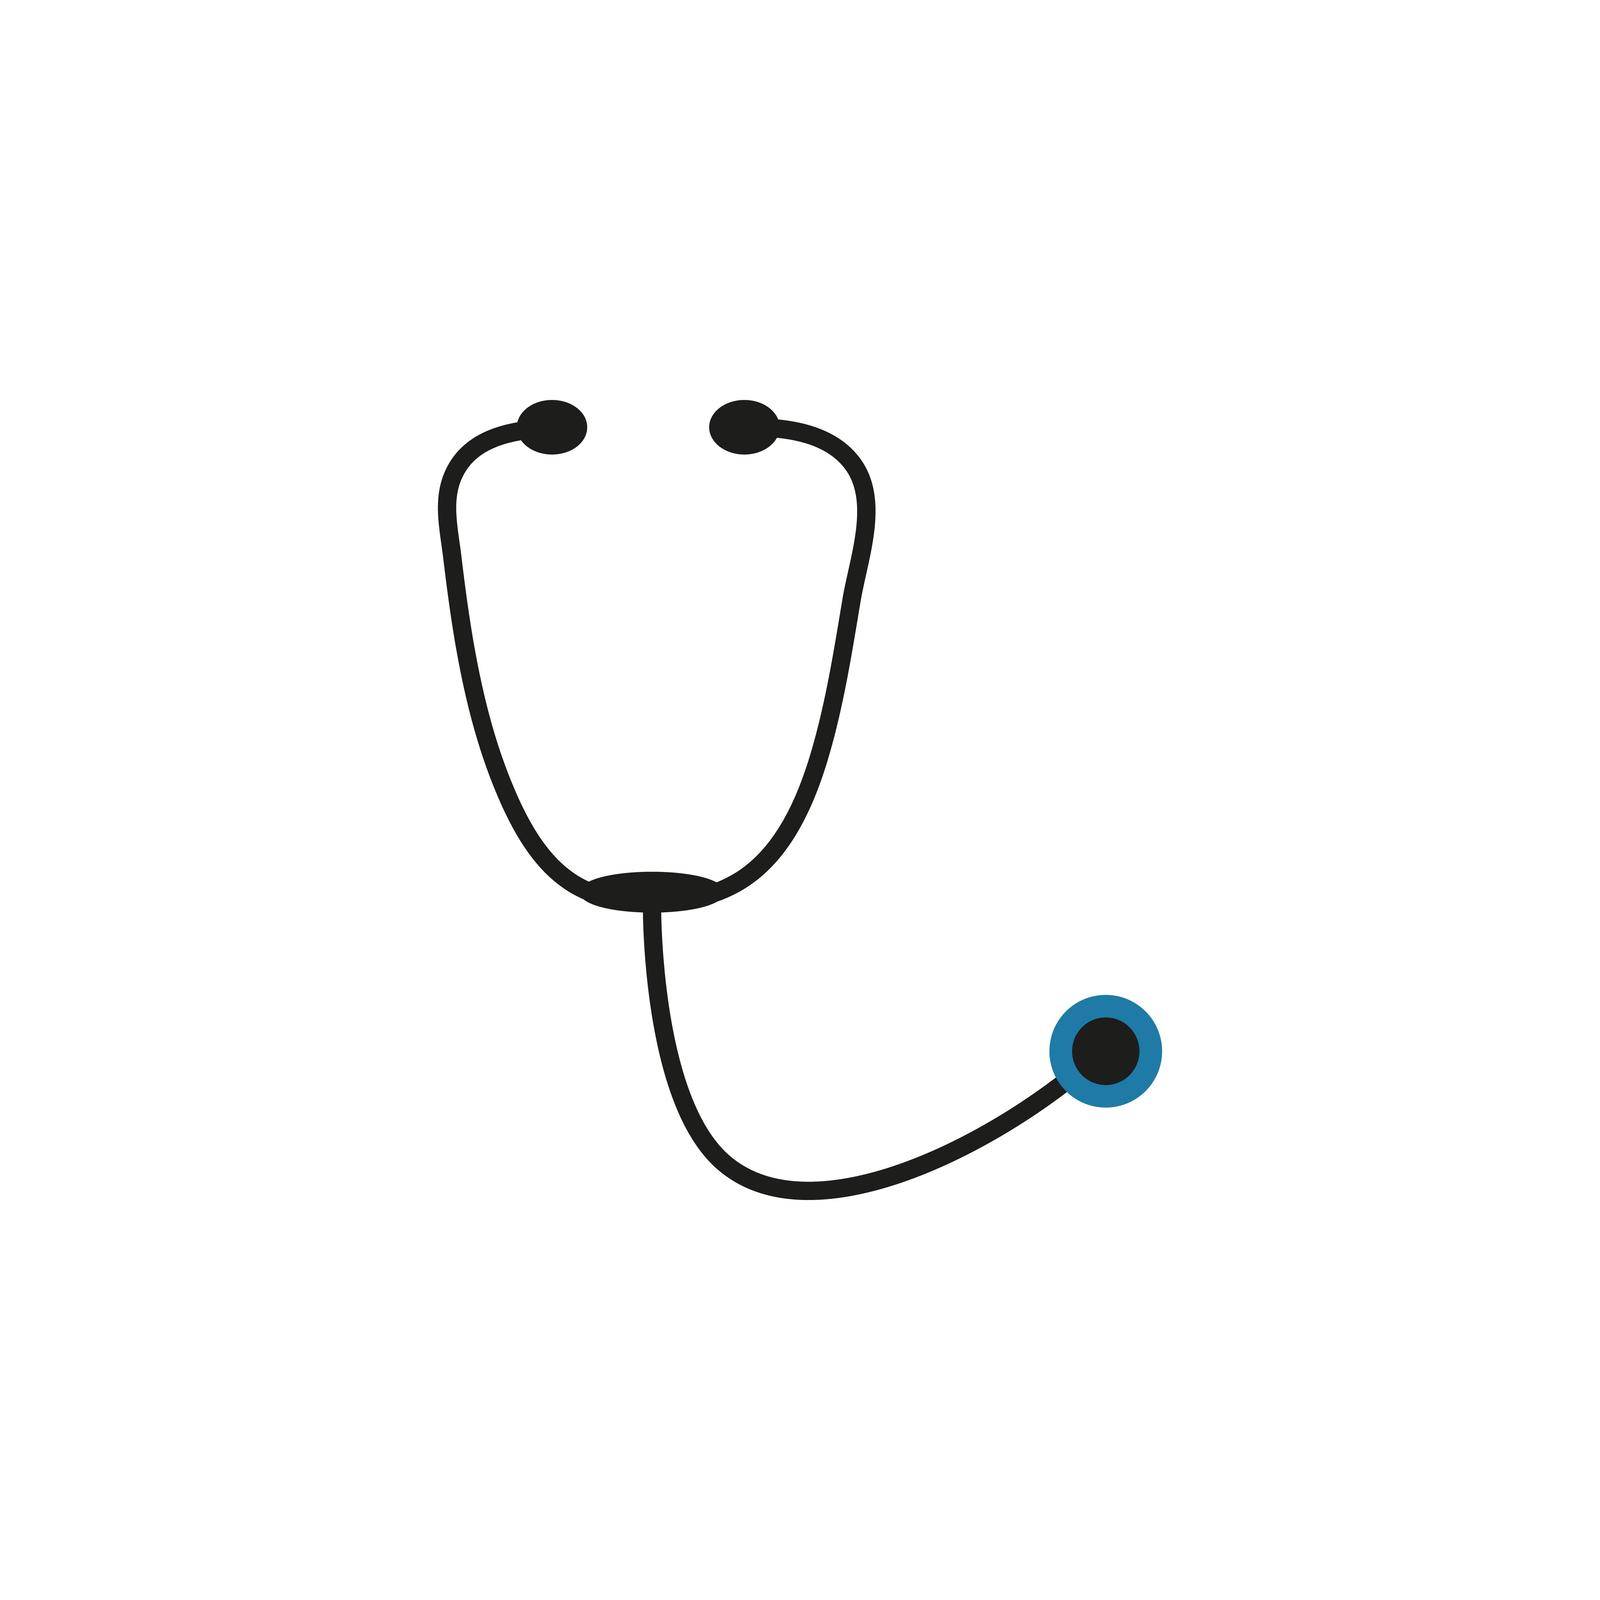 Stethoscope line icon vector illustration. Medical device for listening to heartbeat. Research into human heart disease. Cardiology logo simple flat web element